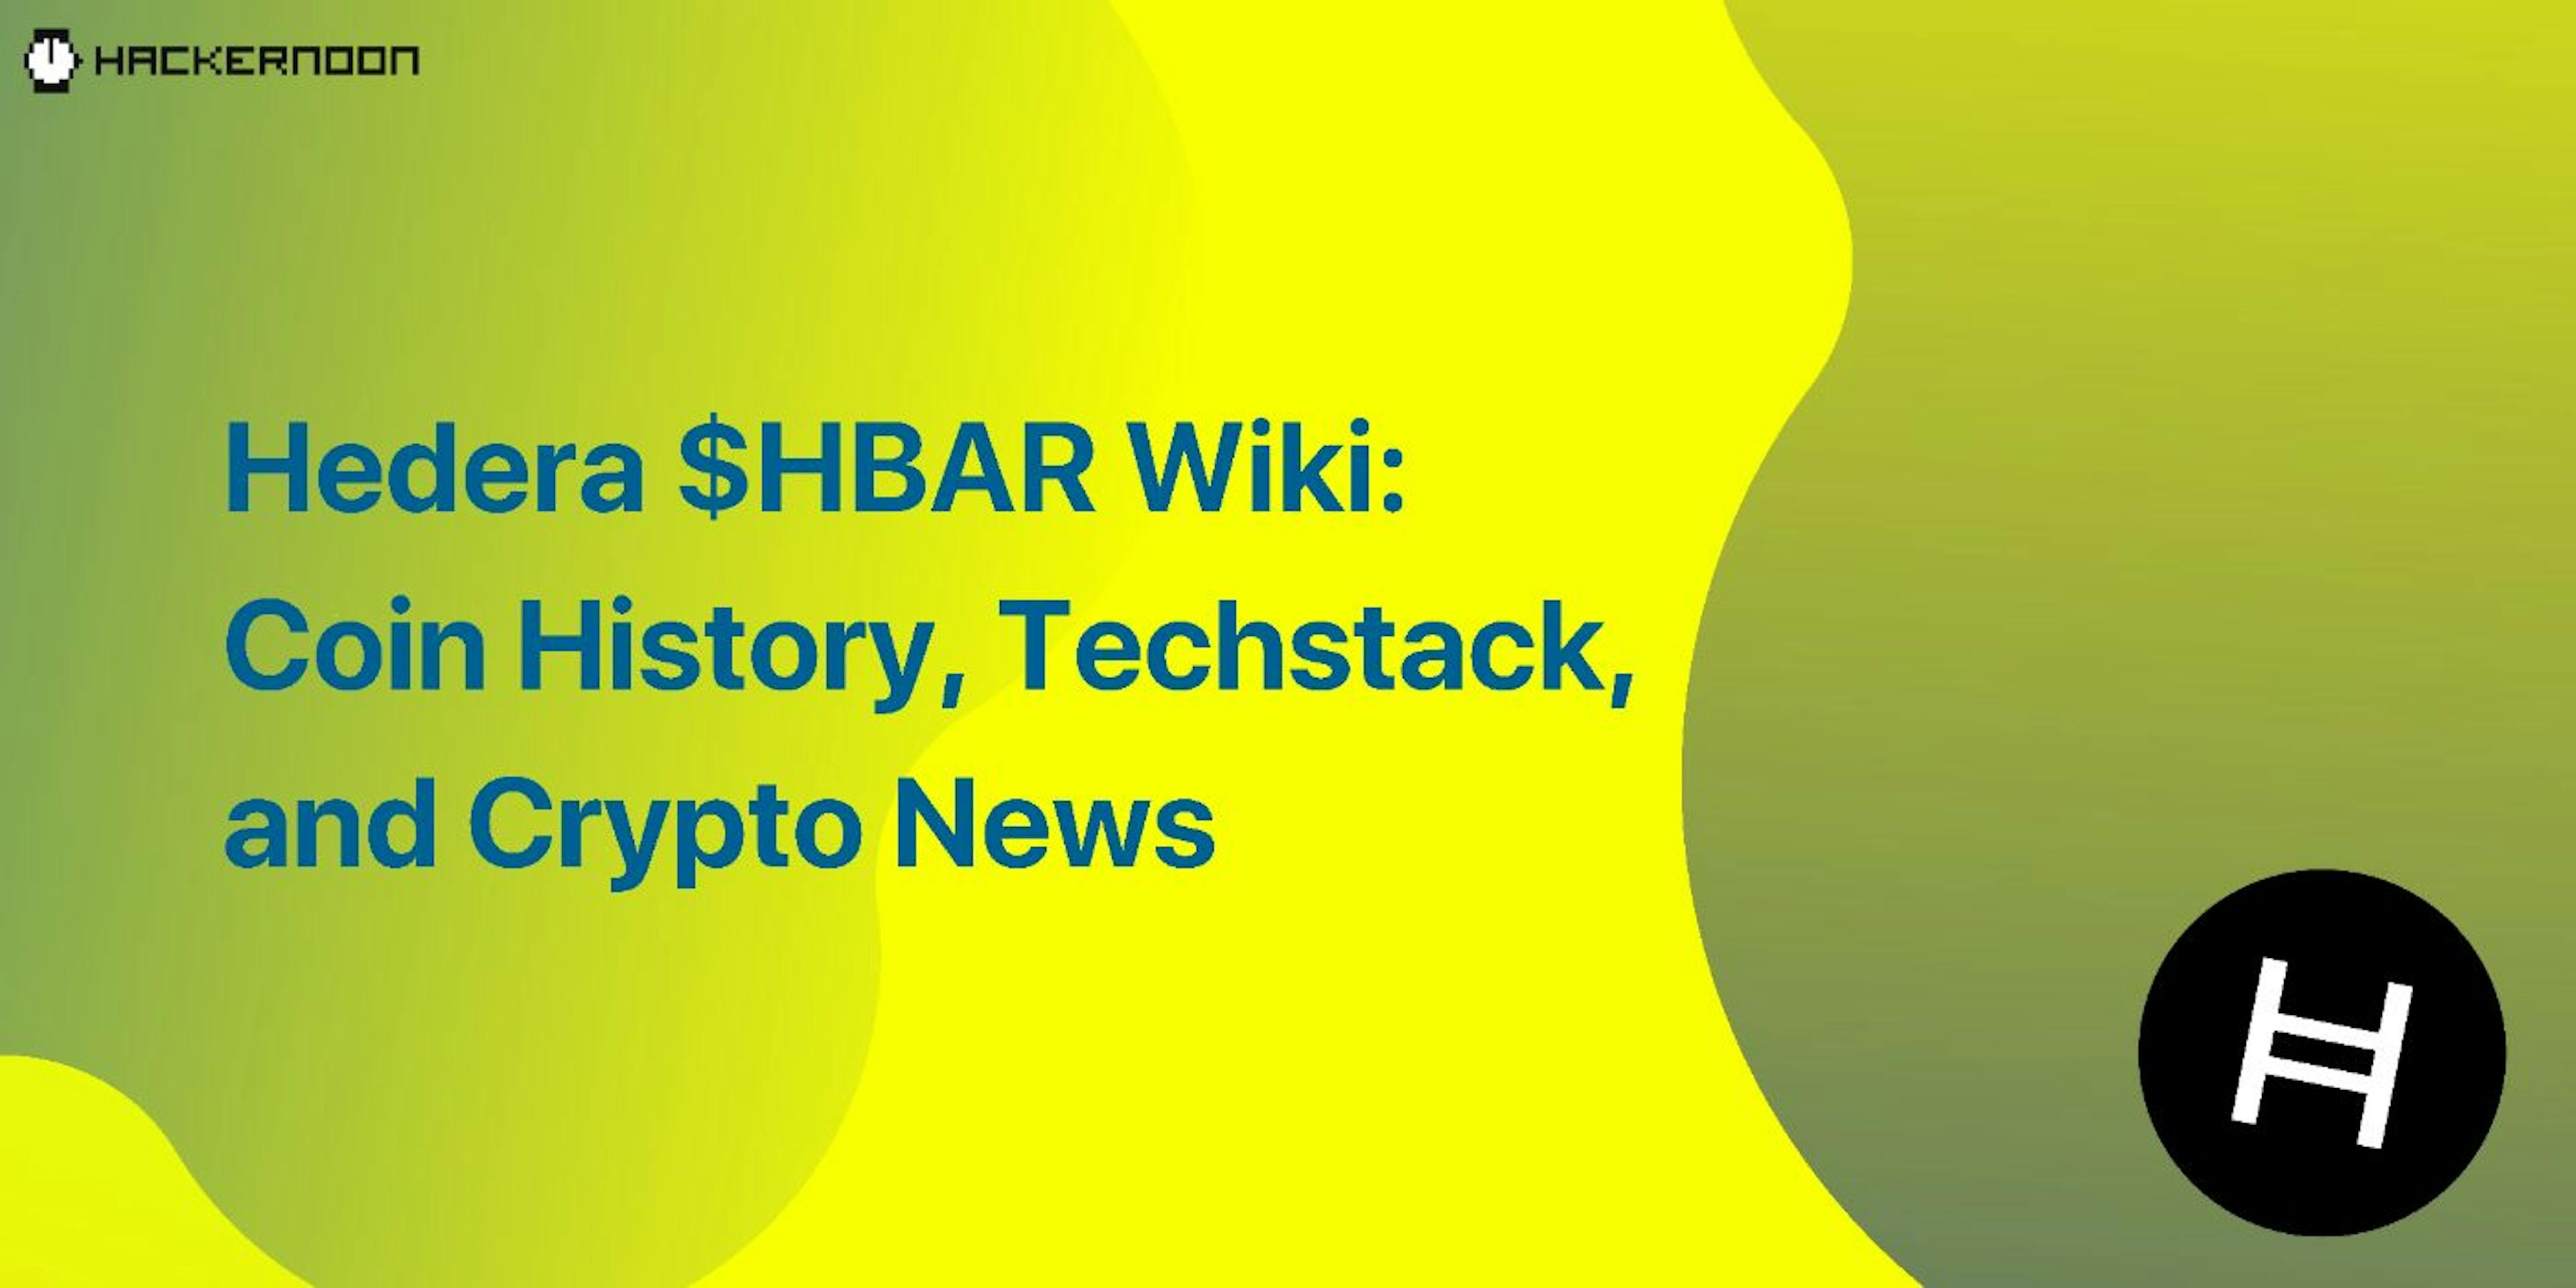 featured image - Hedera $HBAR Wiki: Coin History, Techstack, and Crypto News